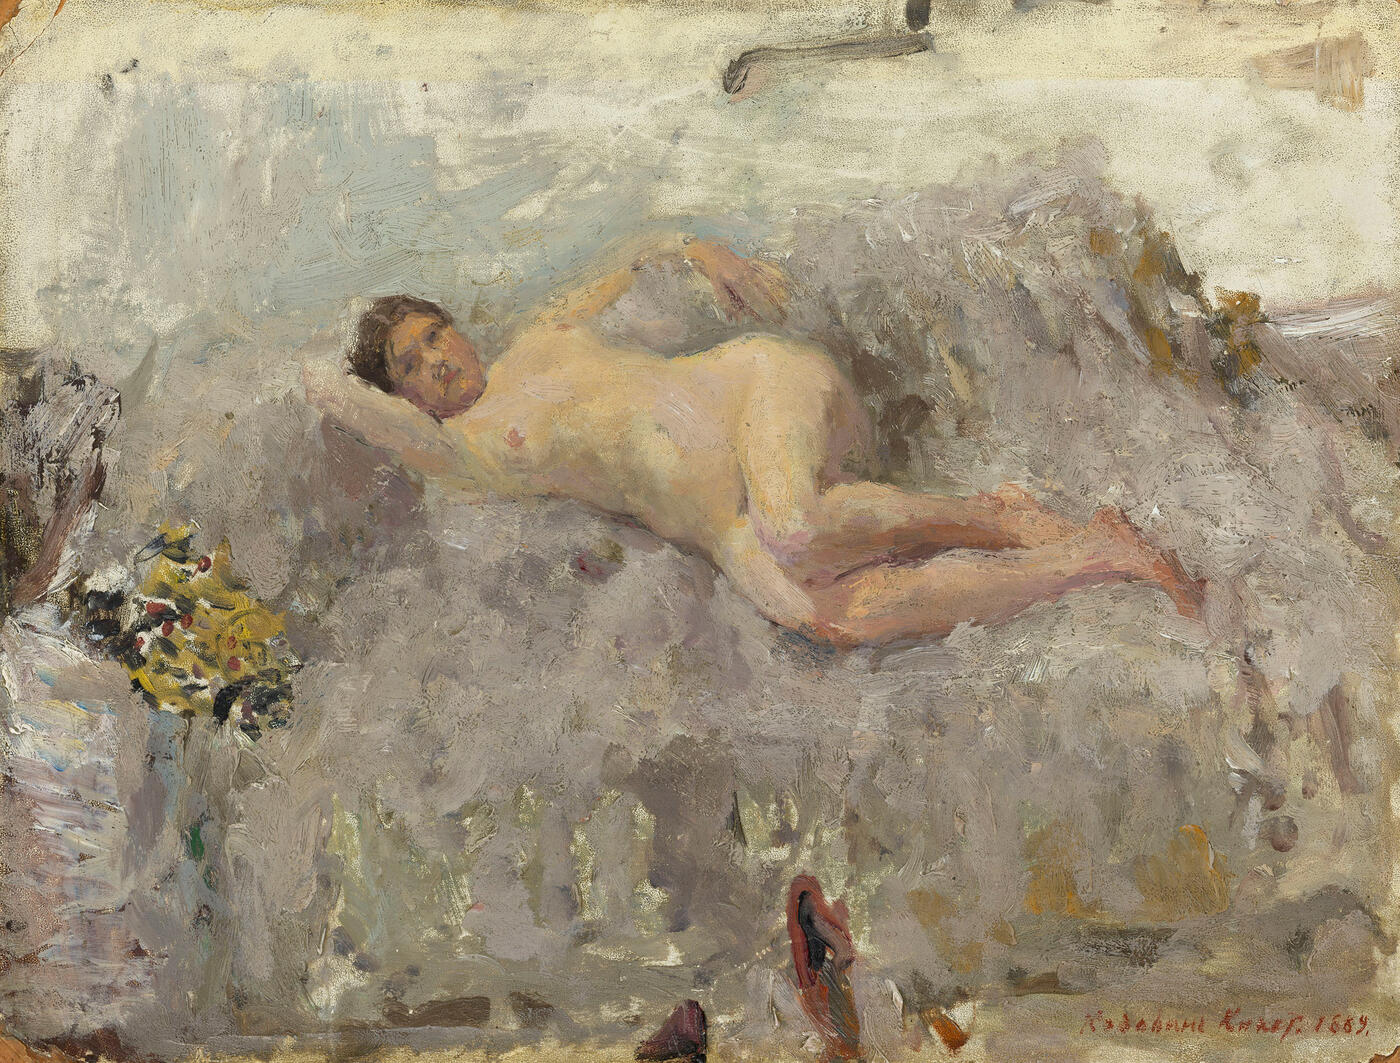 Reclining Nude on White Drapes